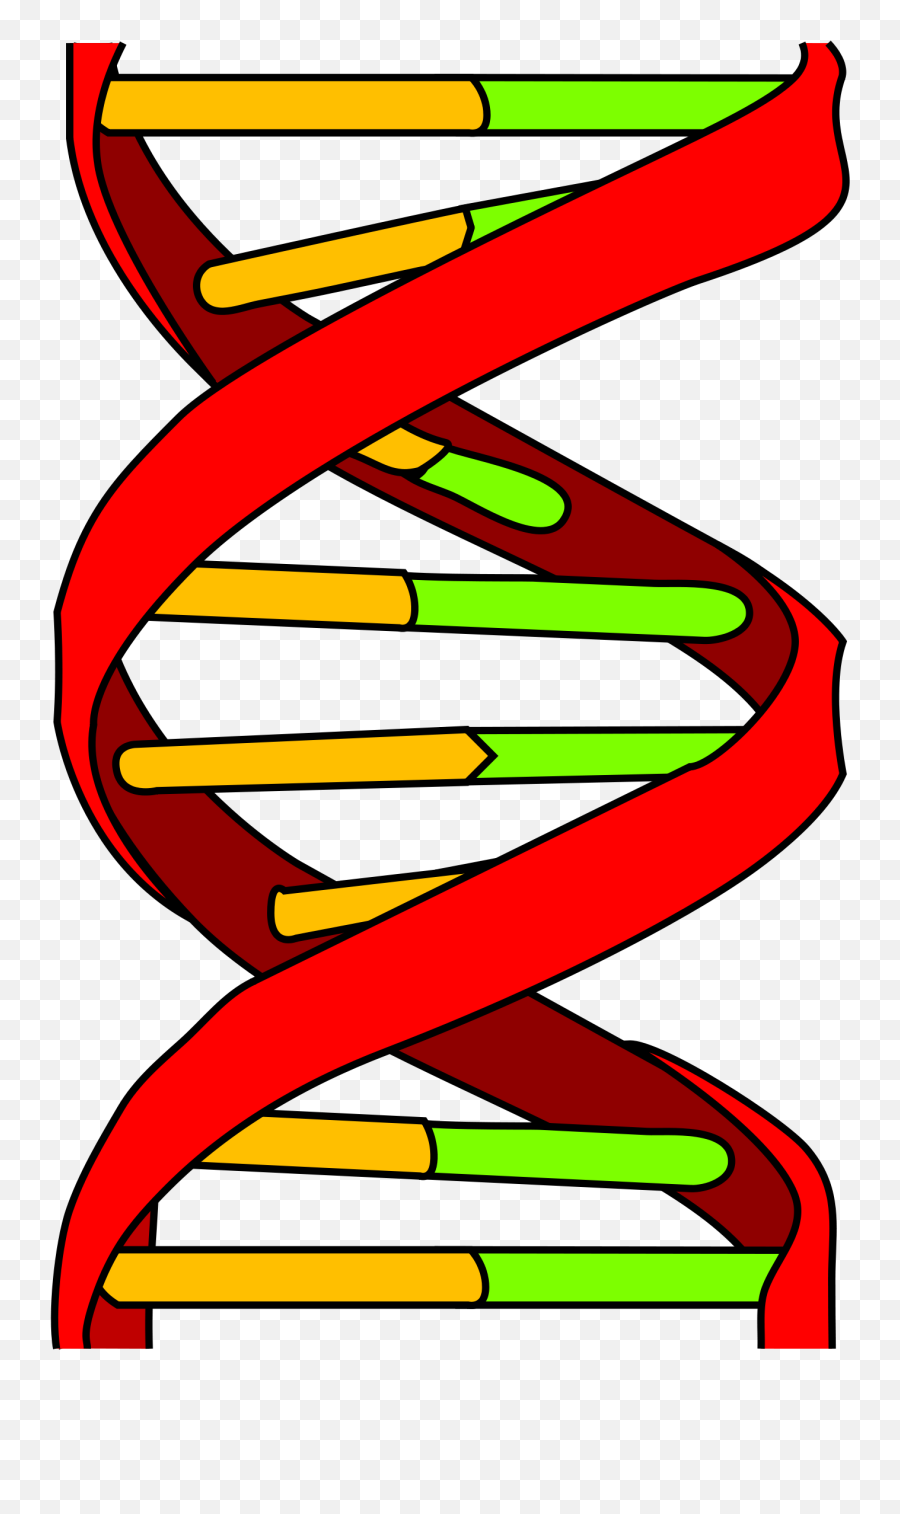 November 16 Genetics And Cancer - Treatment Therapies Dna Icon Png,Genetics Icon